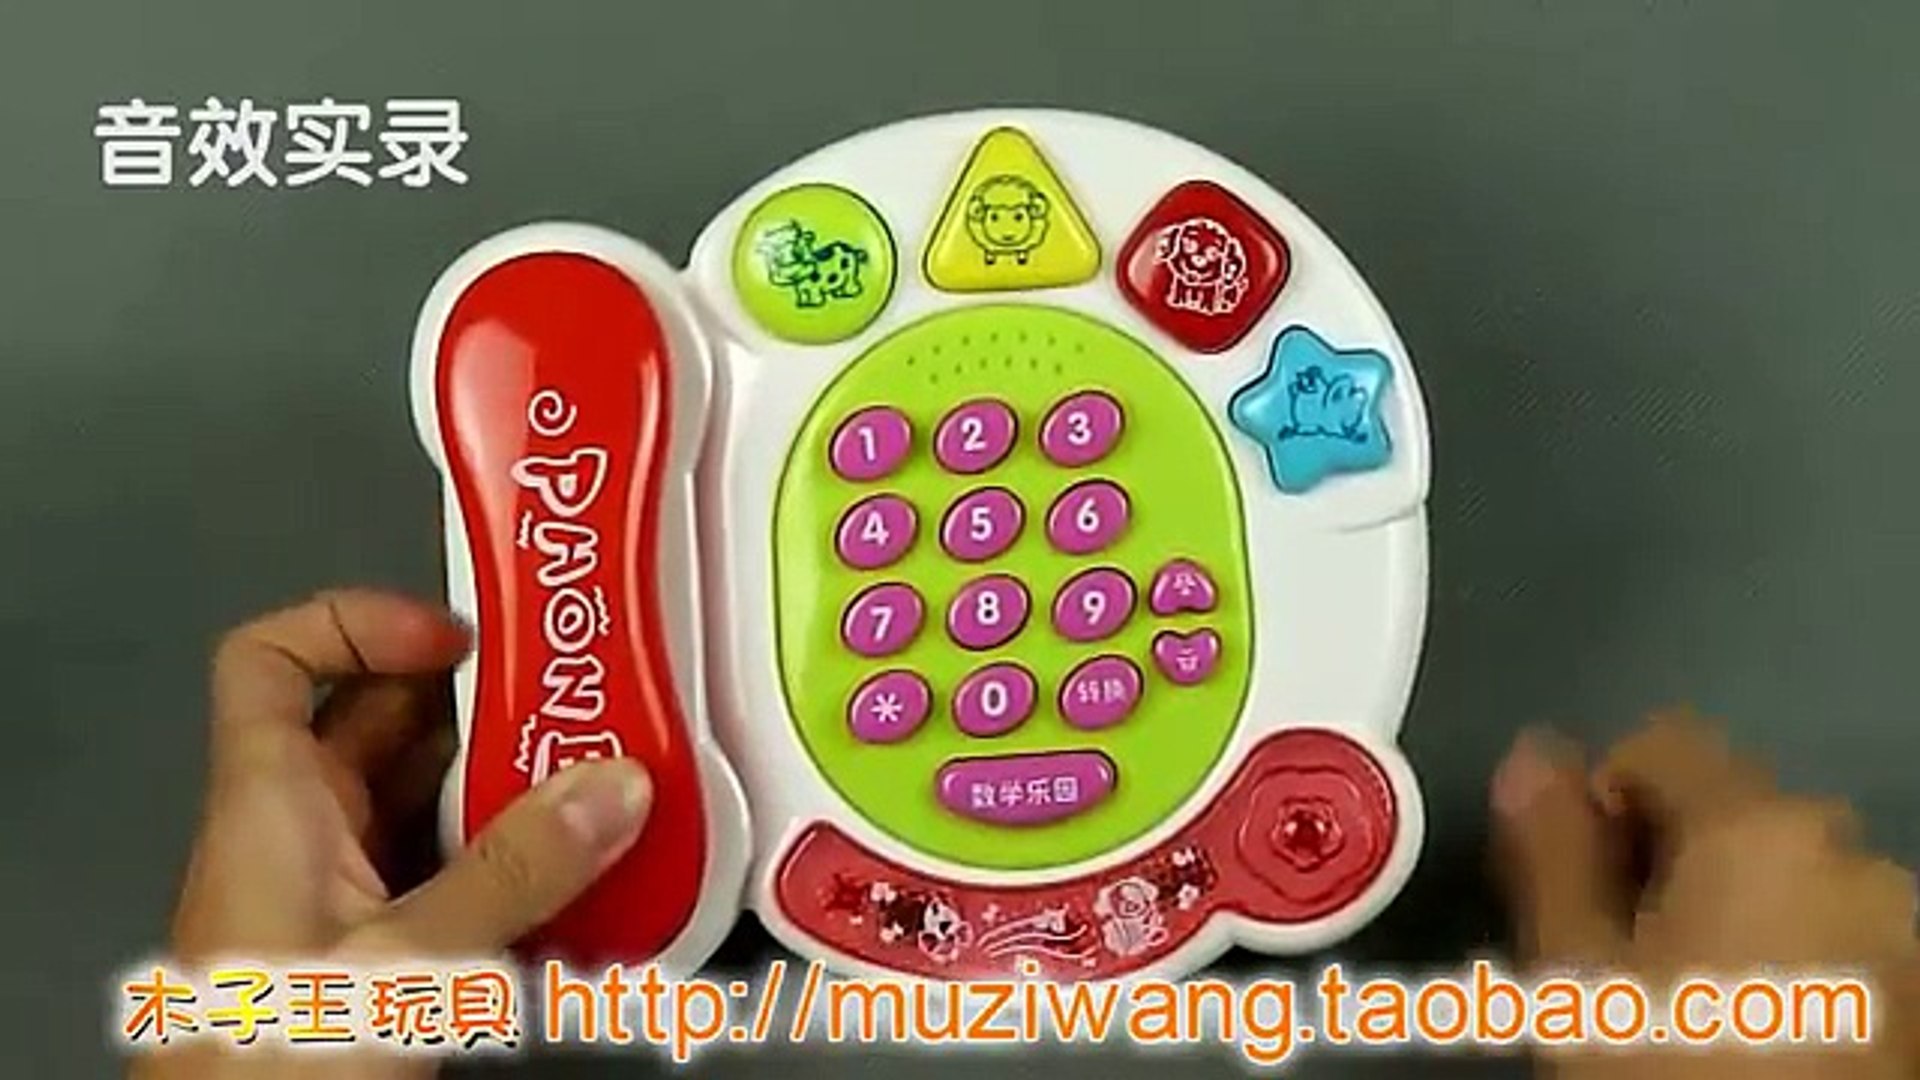 Children  Early childhood  machine  Music  Toys  Telephone  machine   learning 数 learning  Love 提问